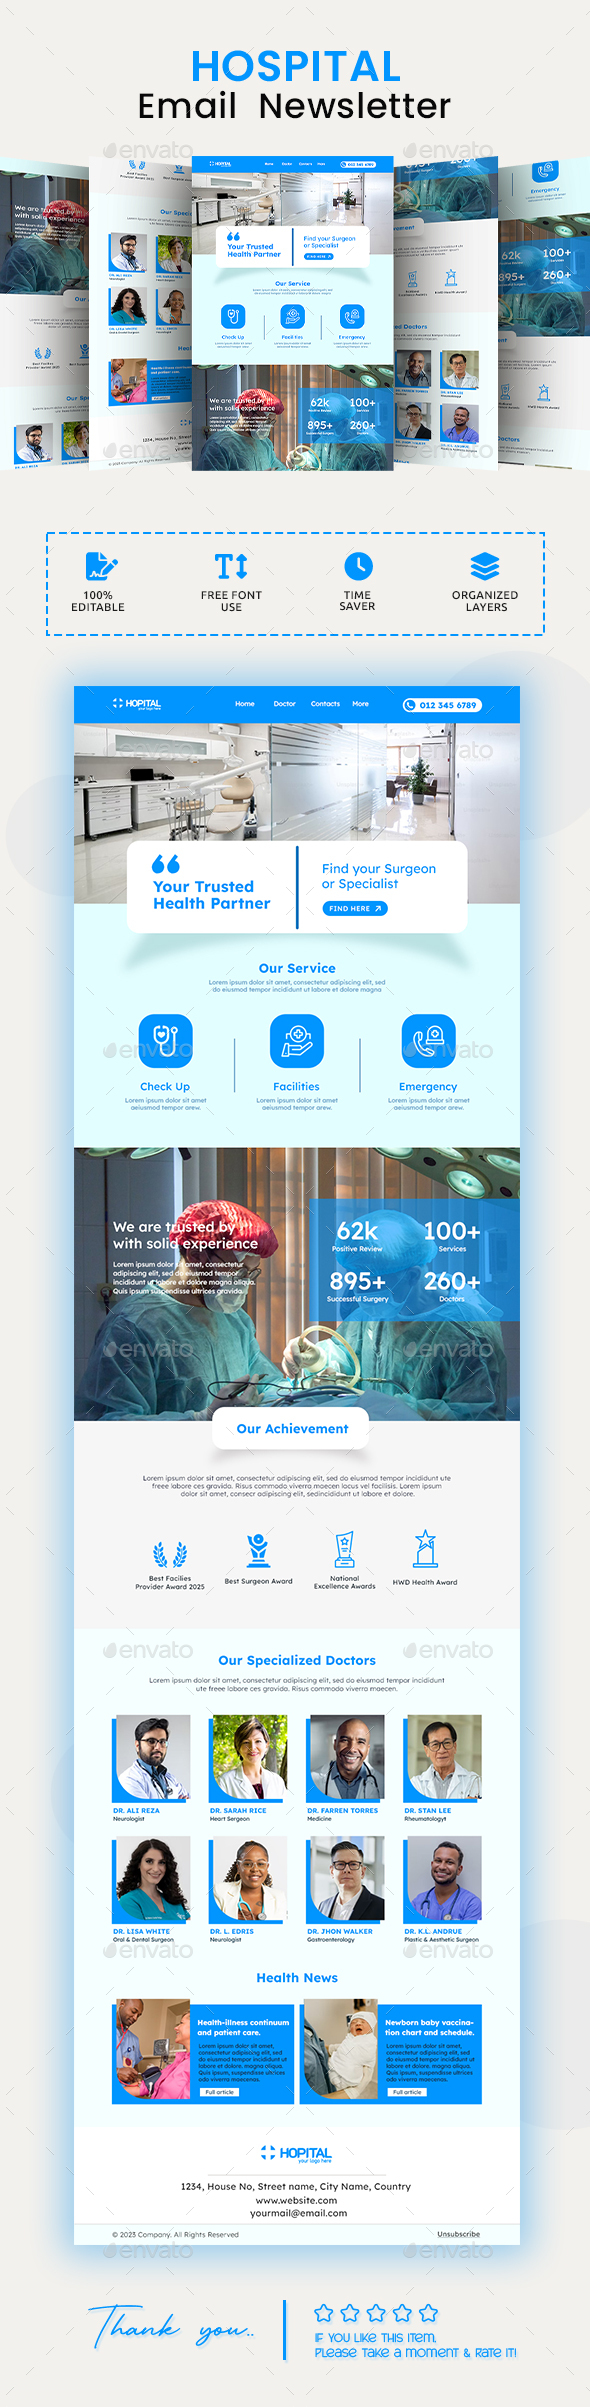 Hospital Email Newsletter PSD Template.